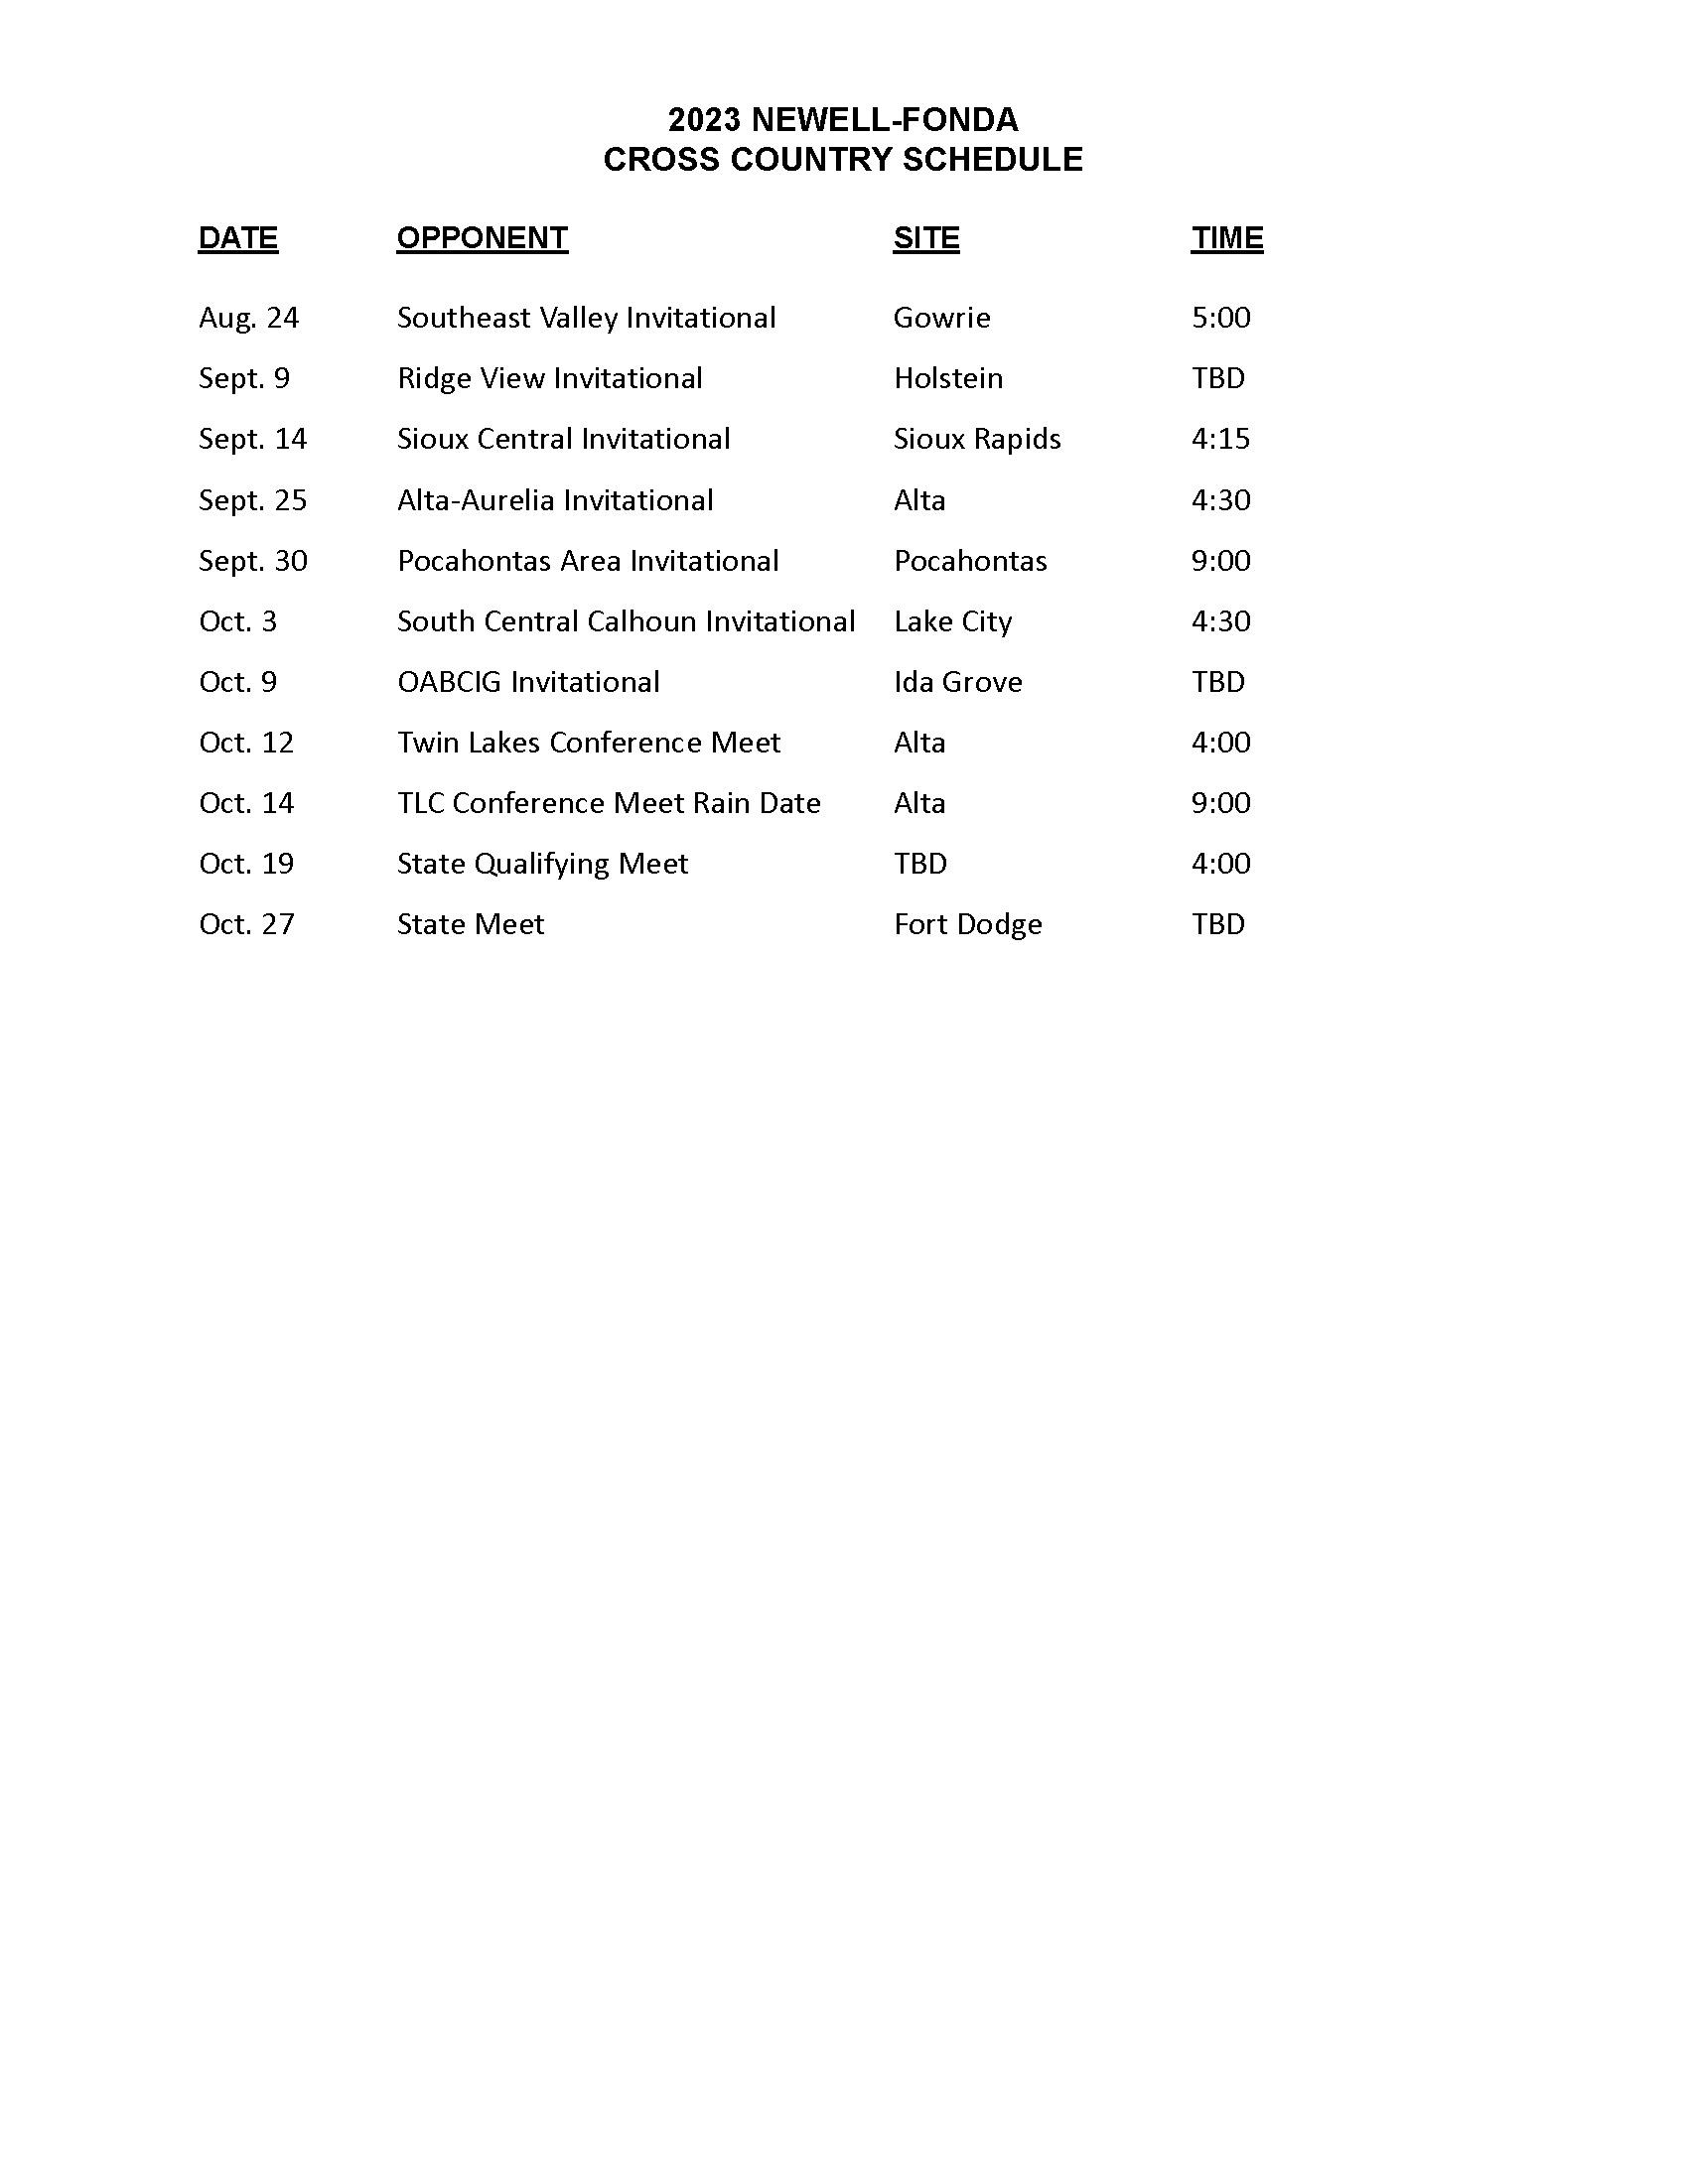 Cross Country Schedule 2023